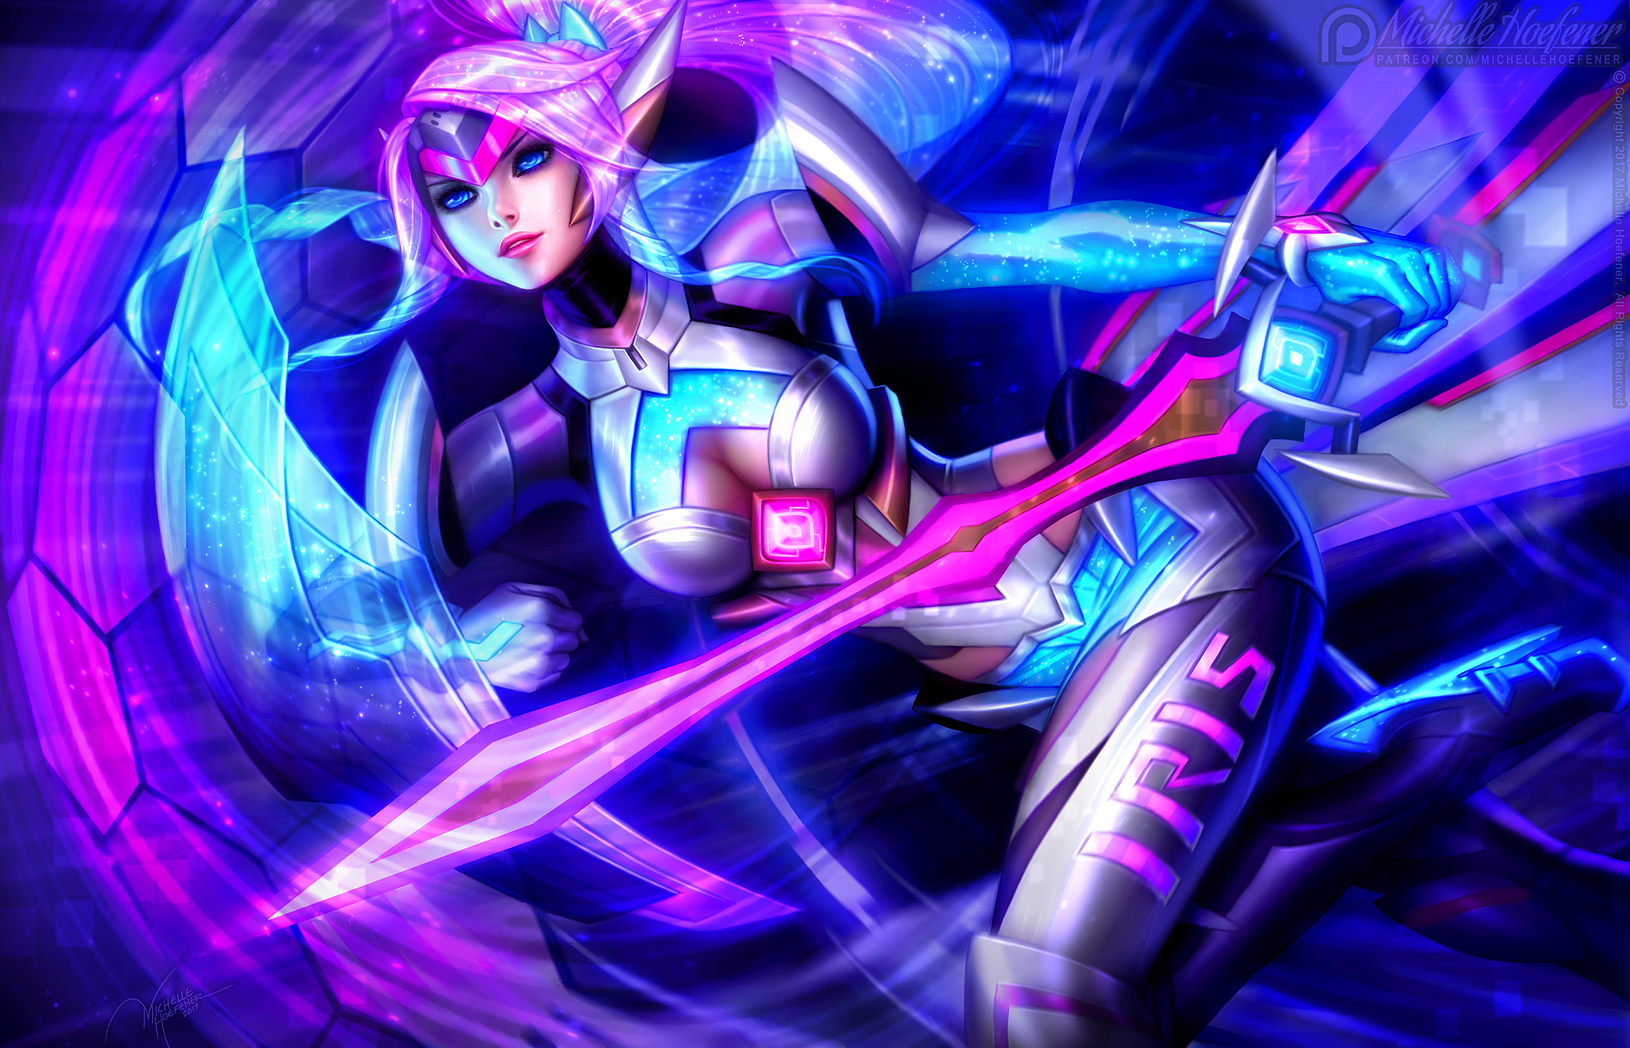 Michelle Hoefener Drawing Women Pink Hair Ponytail Blue Eyes Armor Shield Weapon Sword Pink Blue Glo 1630x1048